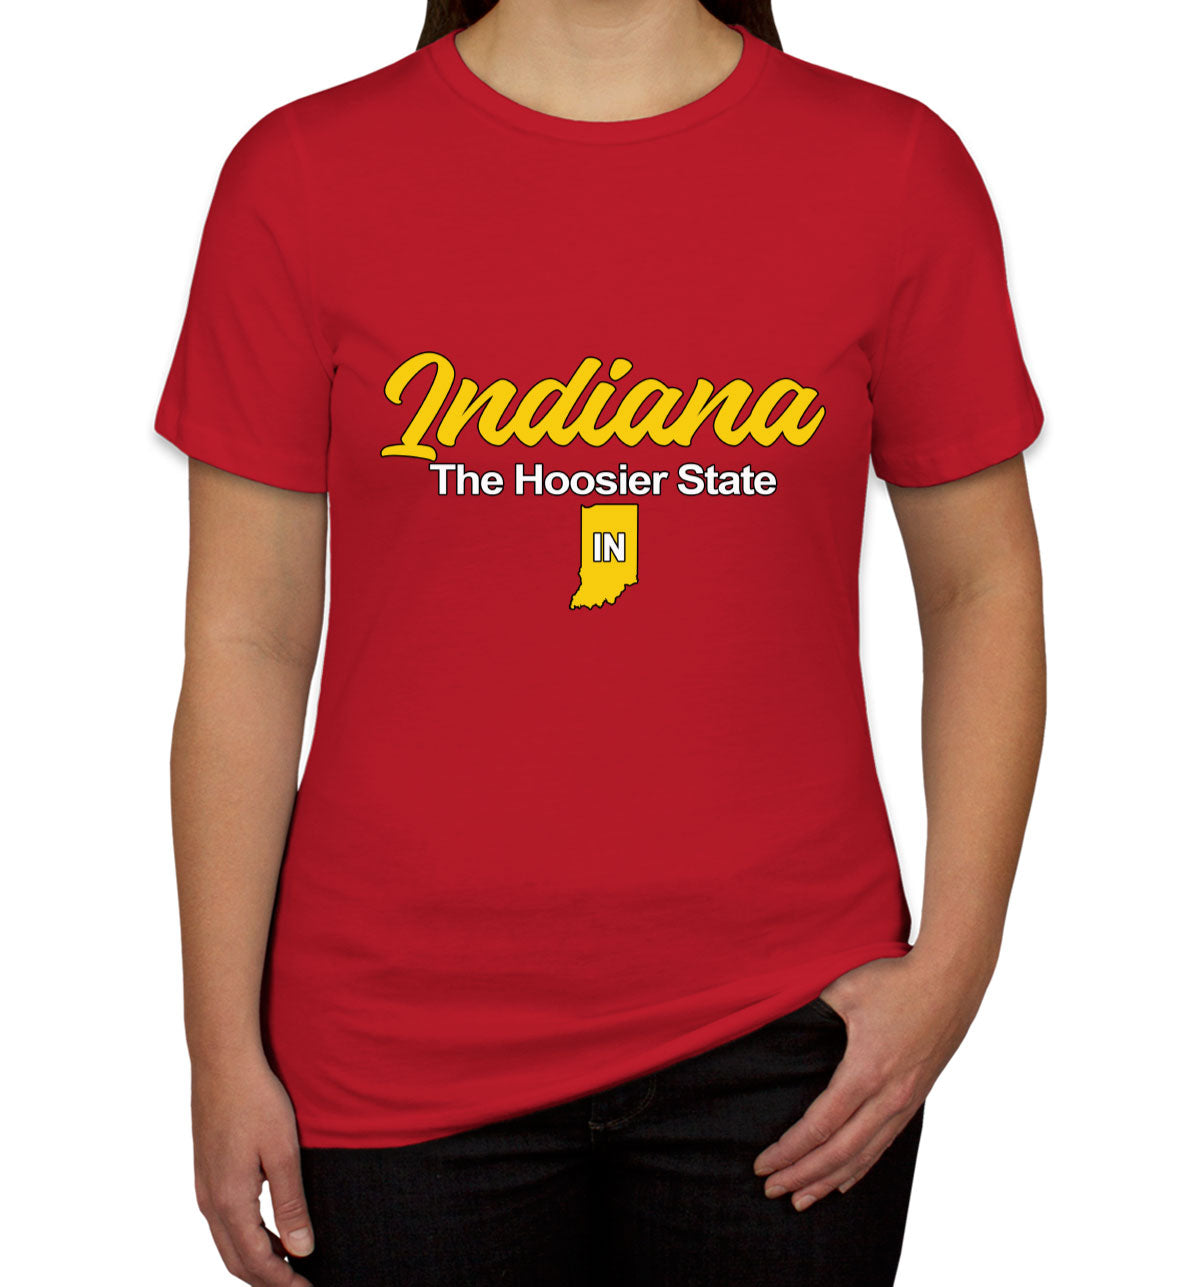 Indiana The Hoosier State Women's T-shirt